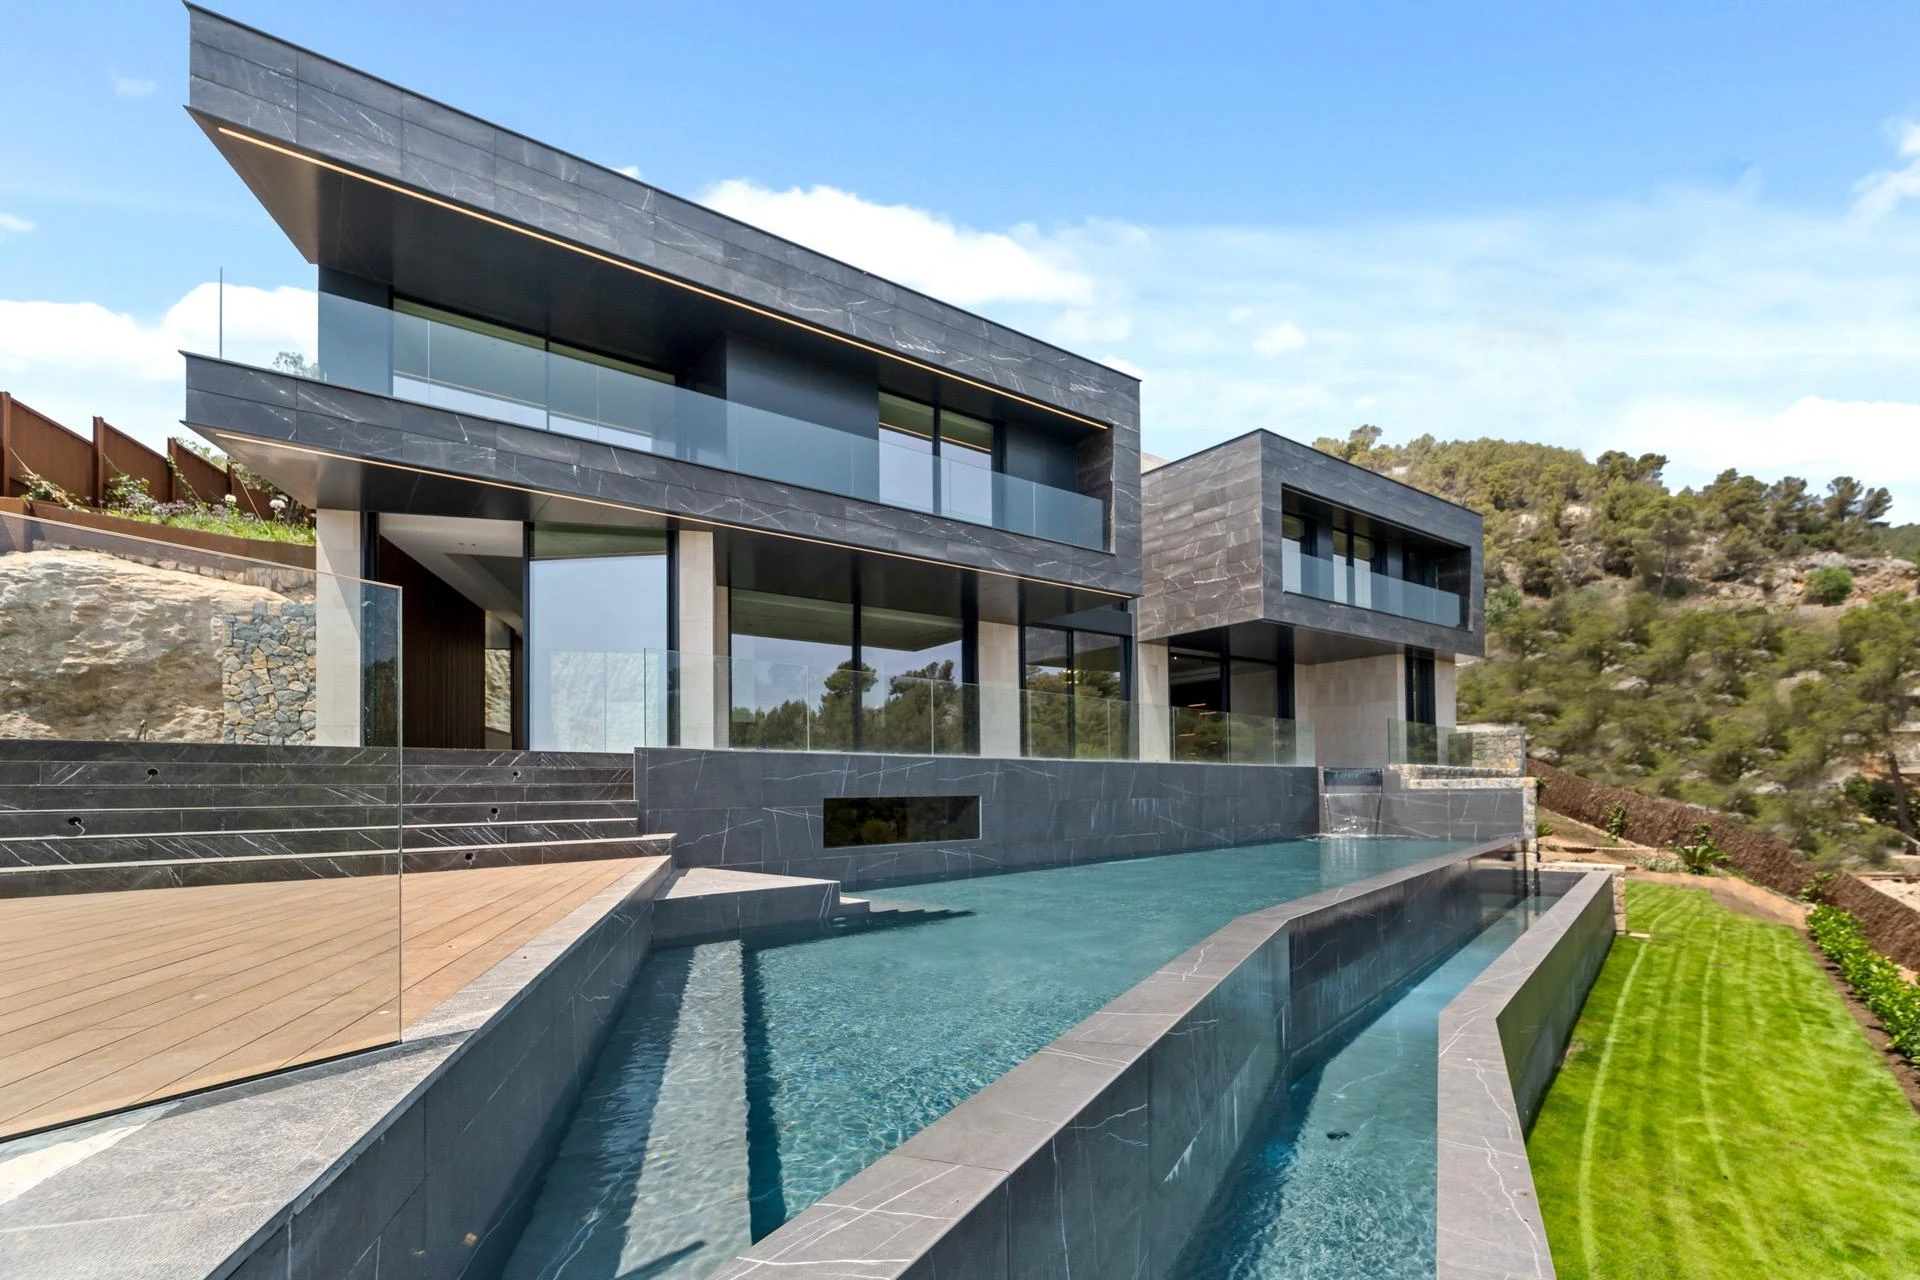 Design and spectacular city views come together in this newly built villa in Son Vida.